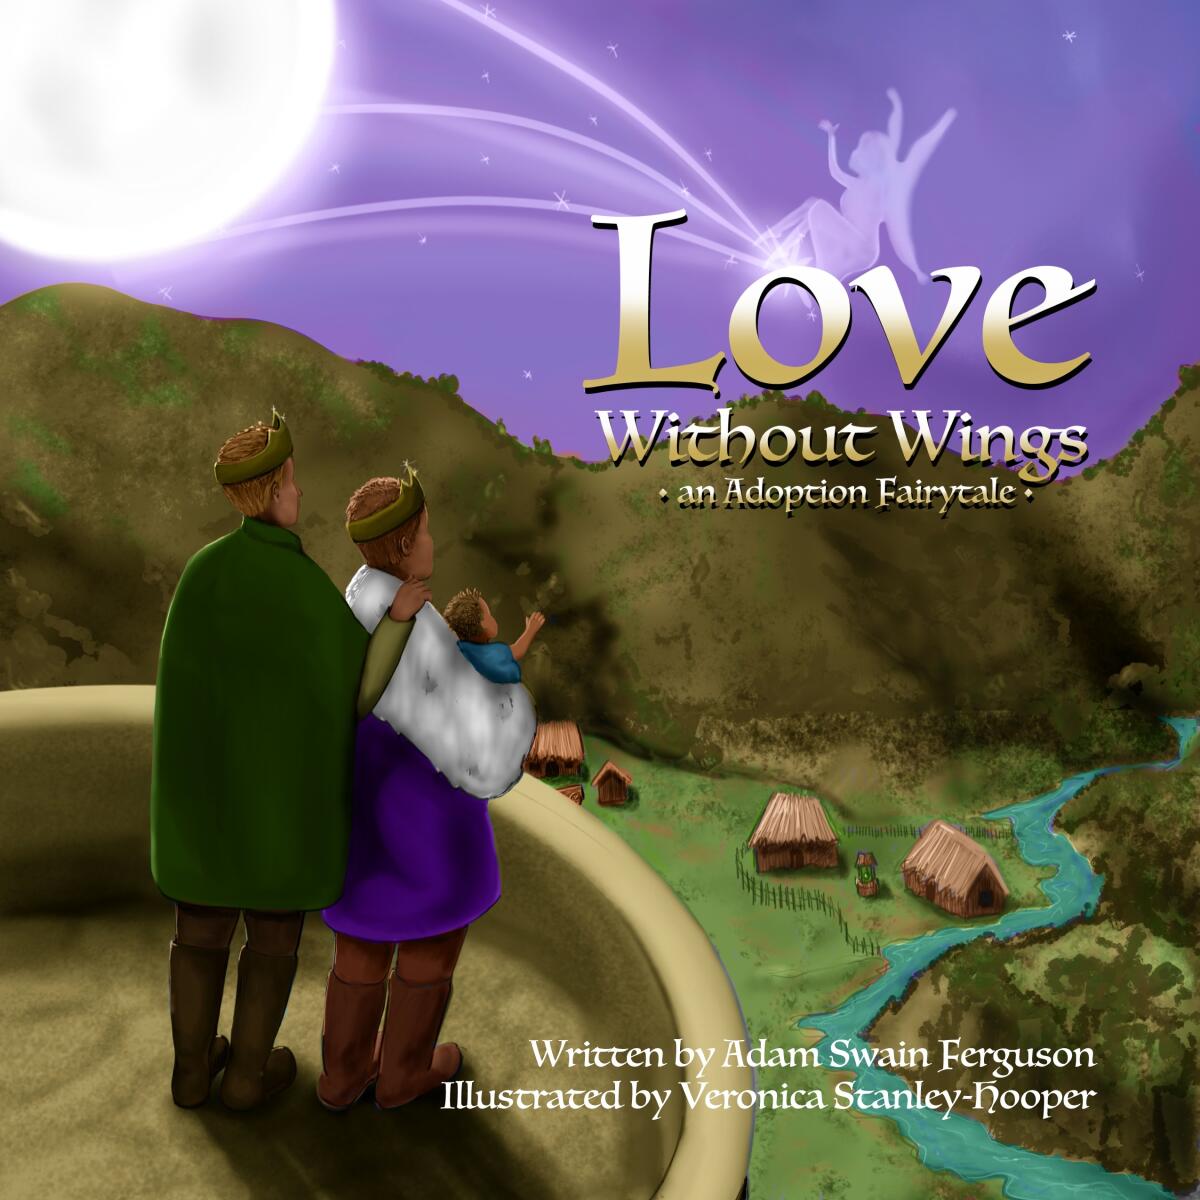 The cover of “Love Without Wings — An Adoption Fairytale” illustrated by Veronica Stanley Hooper.